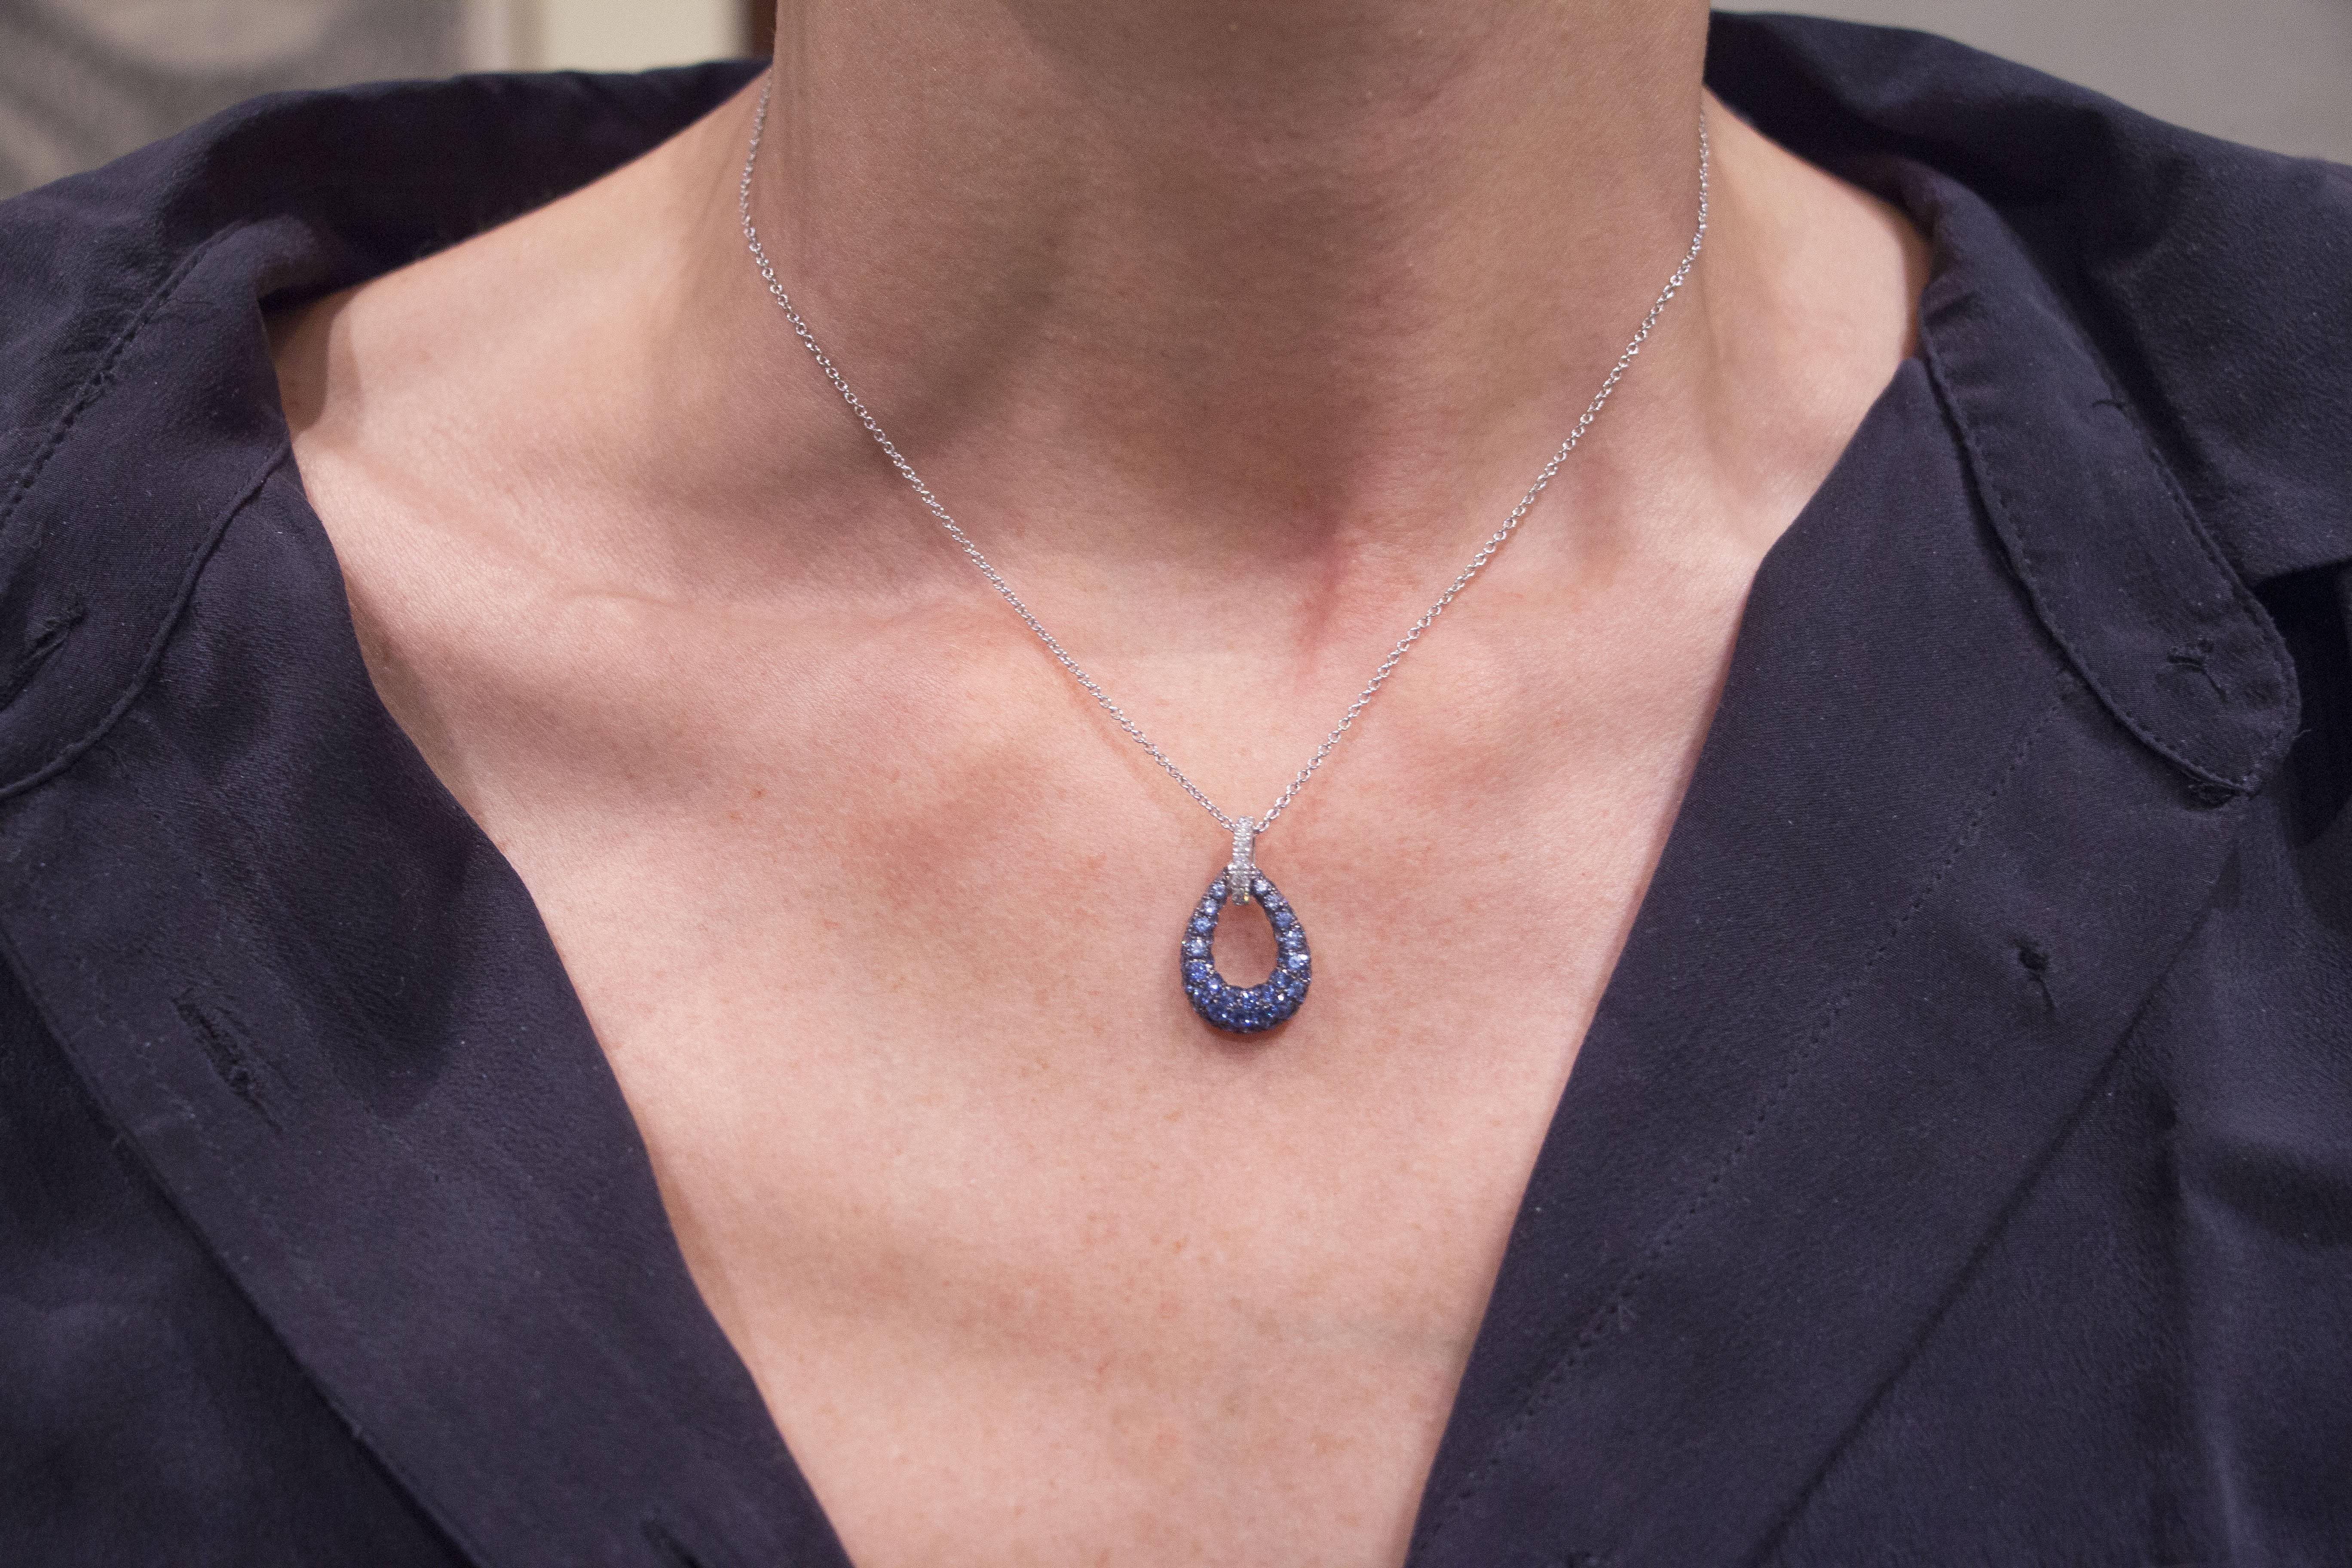 Jona design collection, hand crafted in Italy, 18 karat white gold pendant necklace set with 0.11 carats of white diamonds and 1.64 carats of blue sapphires suspending from a 18 karat white gold chain necklace, 17.71